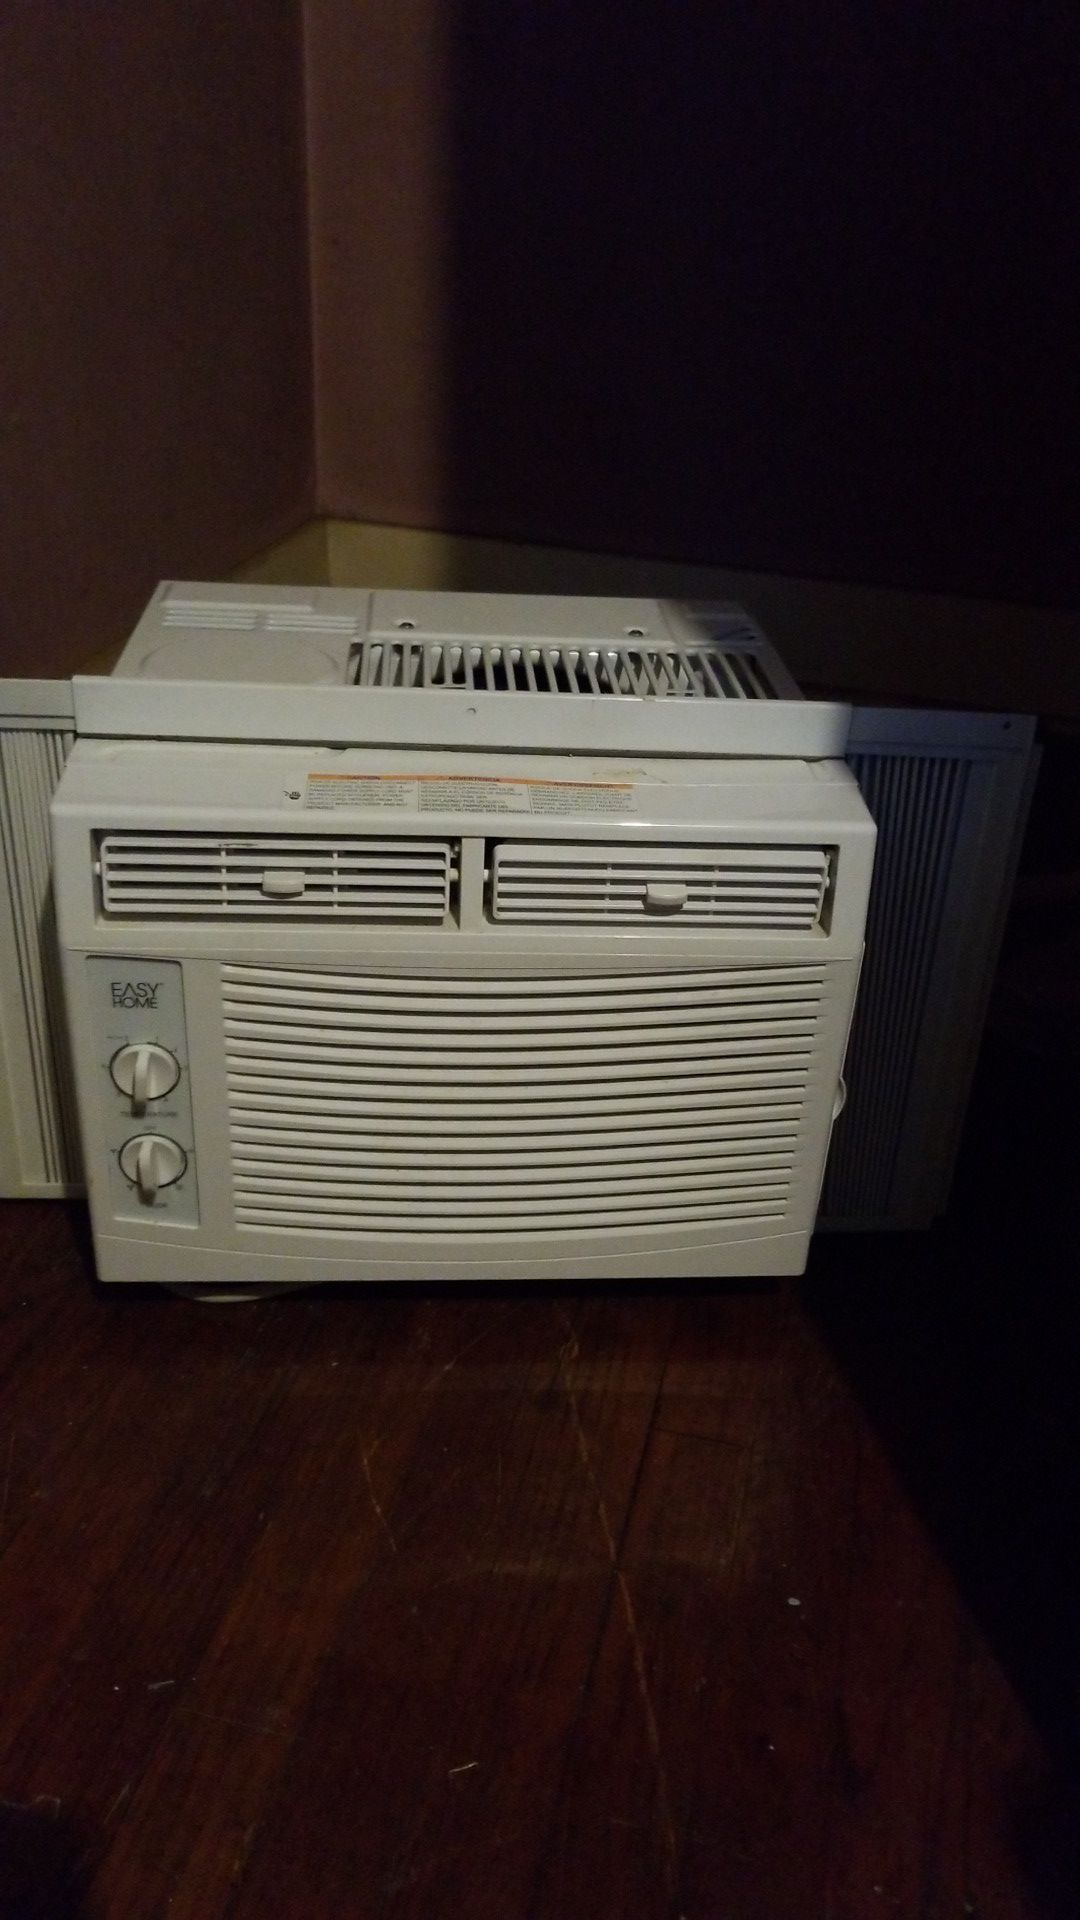 Easy home air conditioner